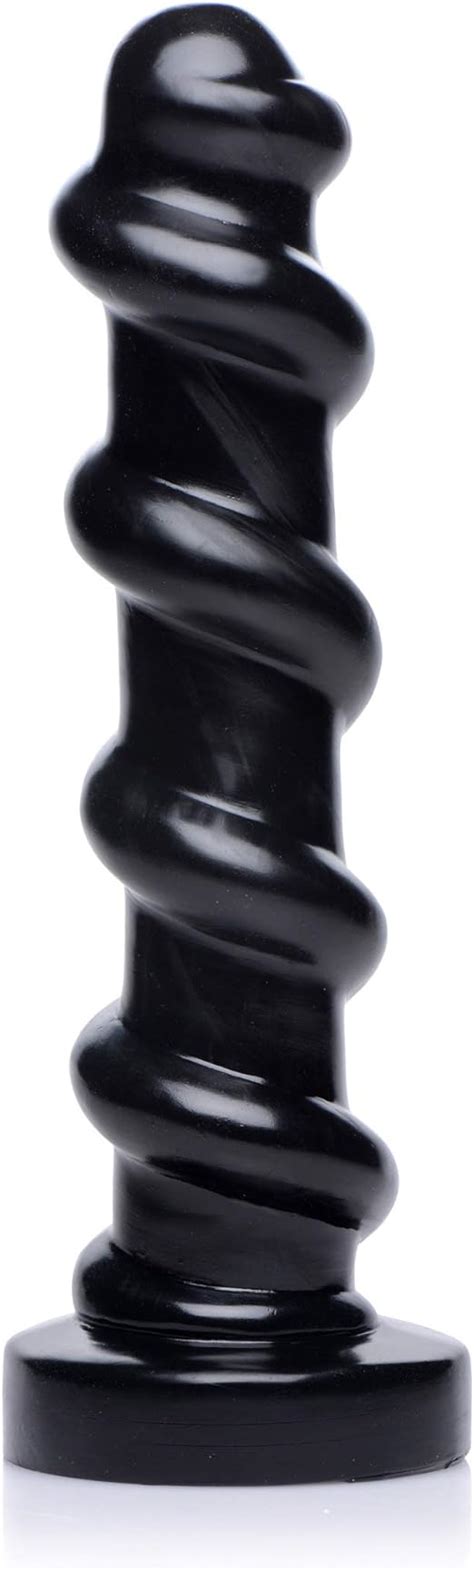 The Screw Giant 125 Inch Dildo Health And Household